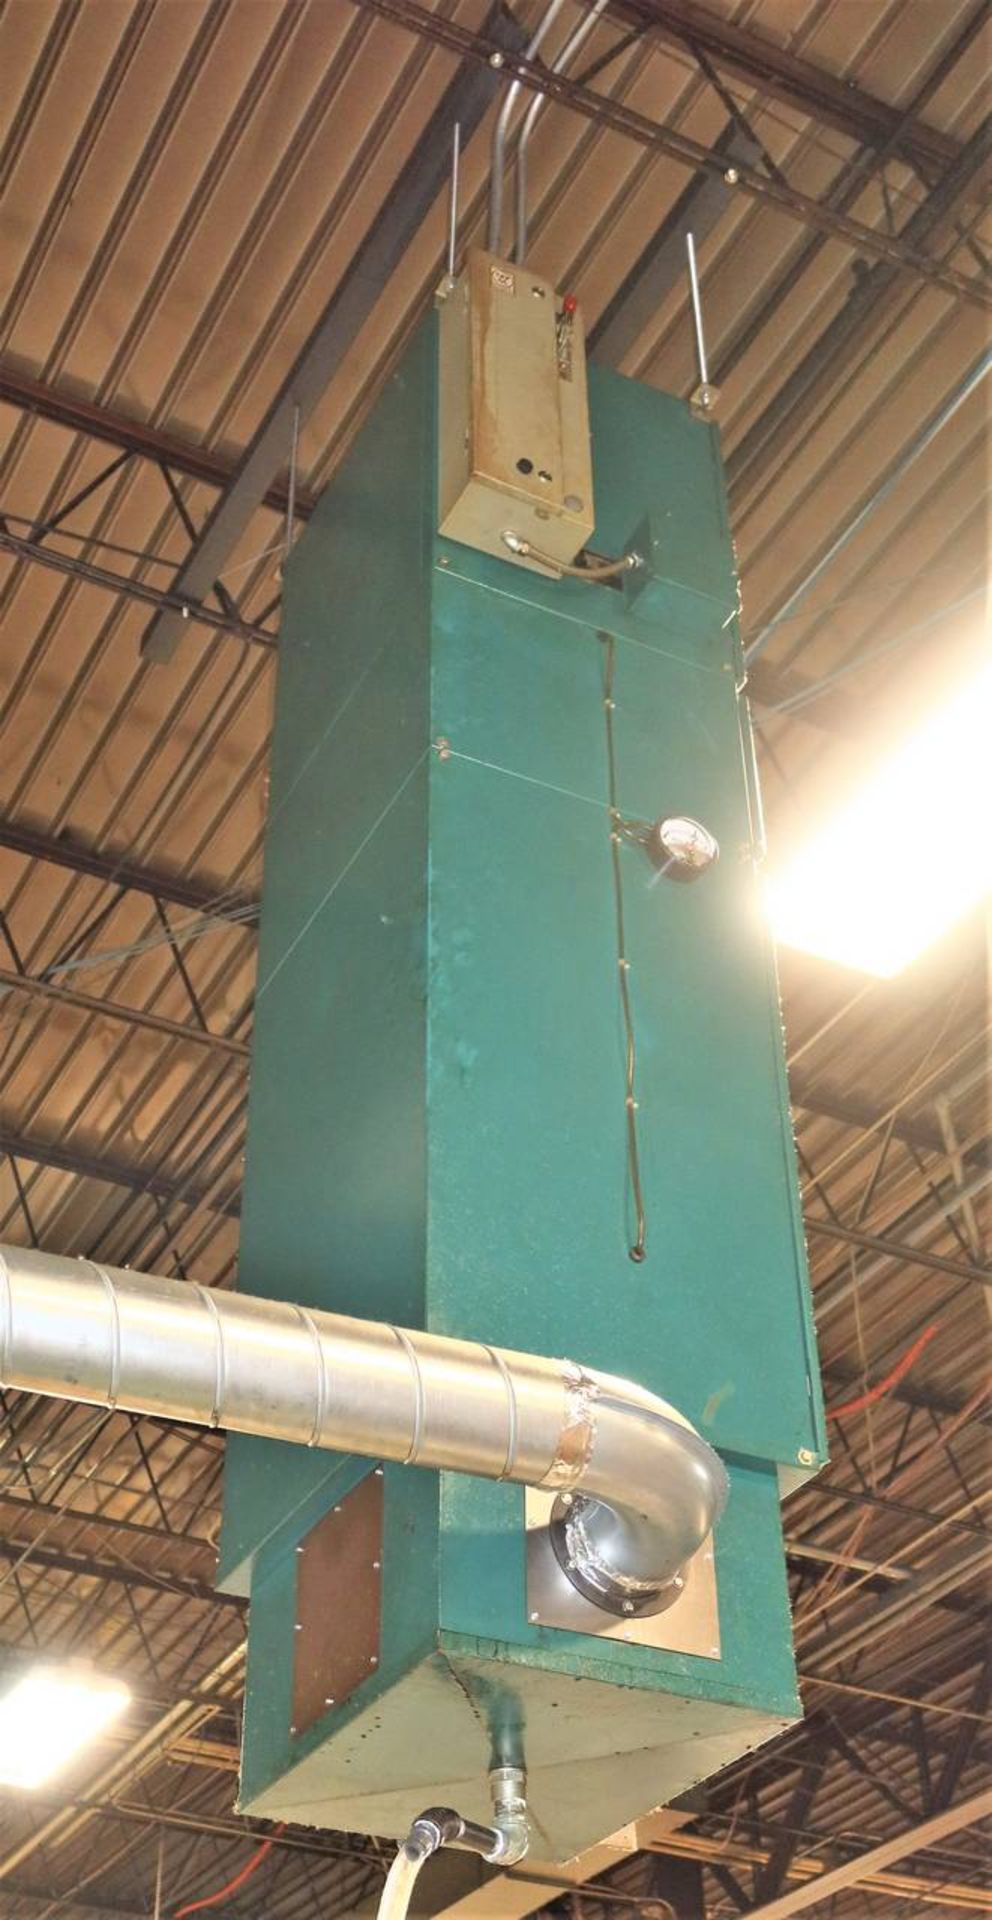 Aercology Mdv 3000 Dust Collector - Image 2 of 2